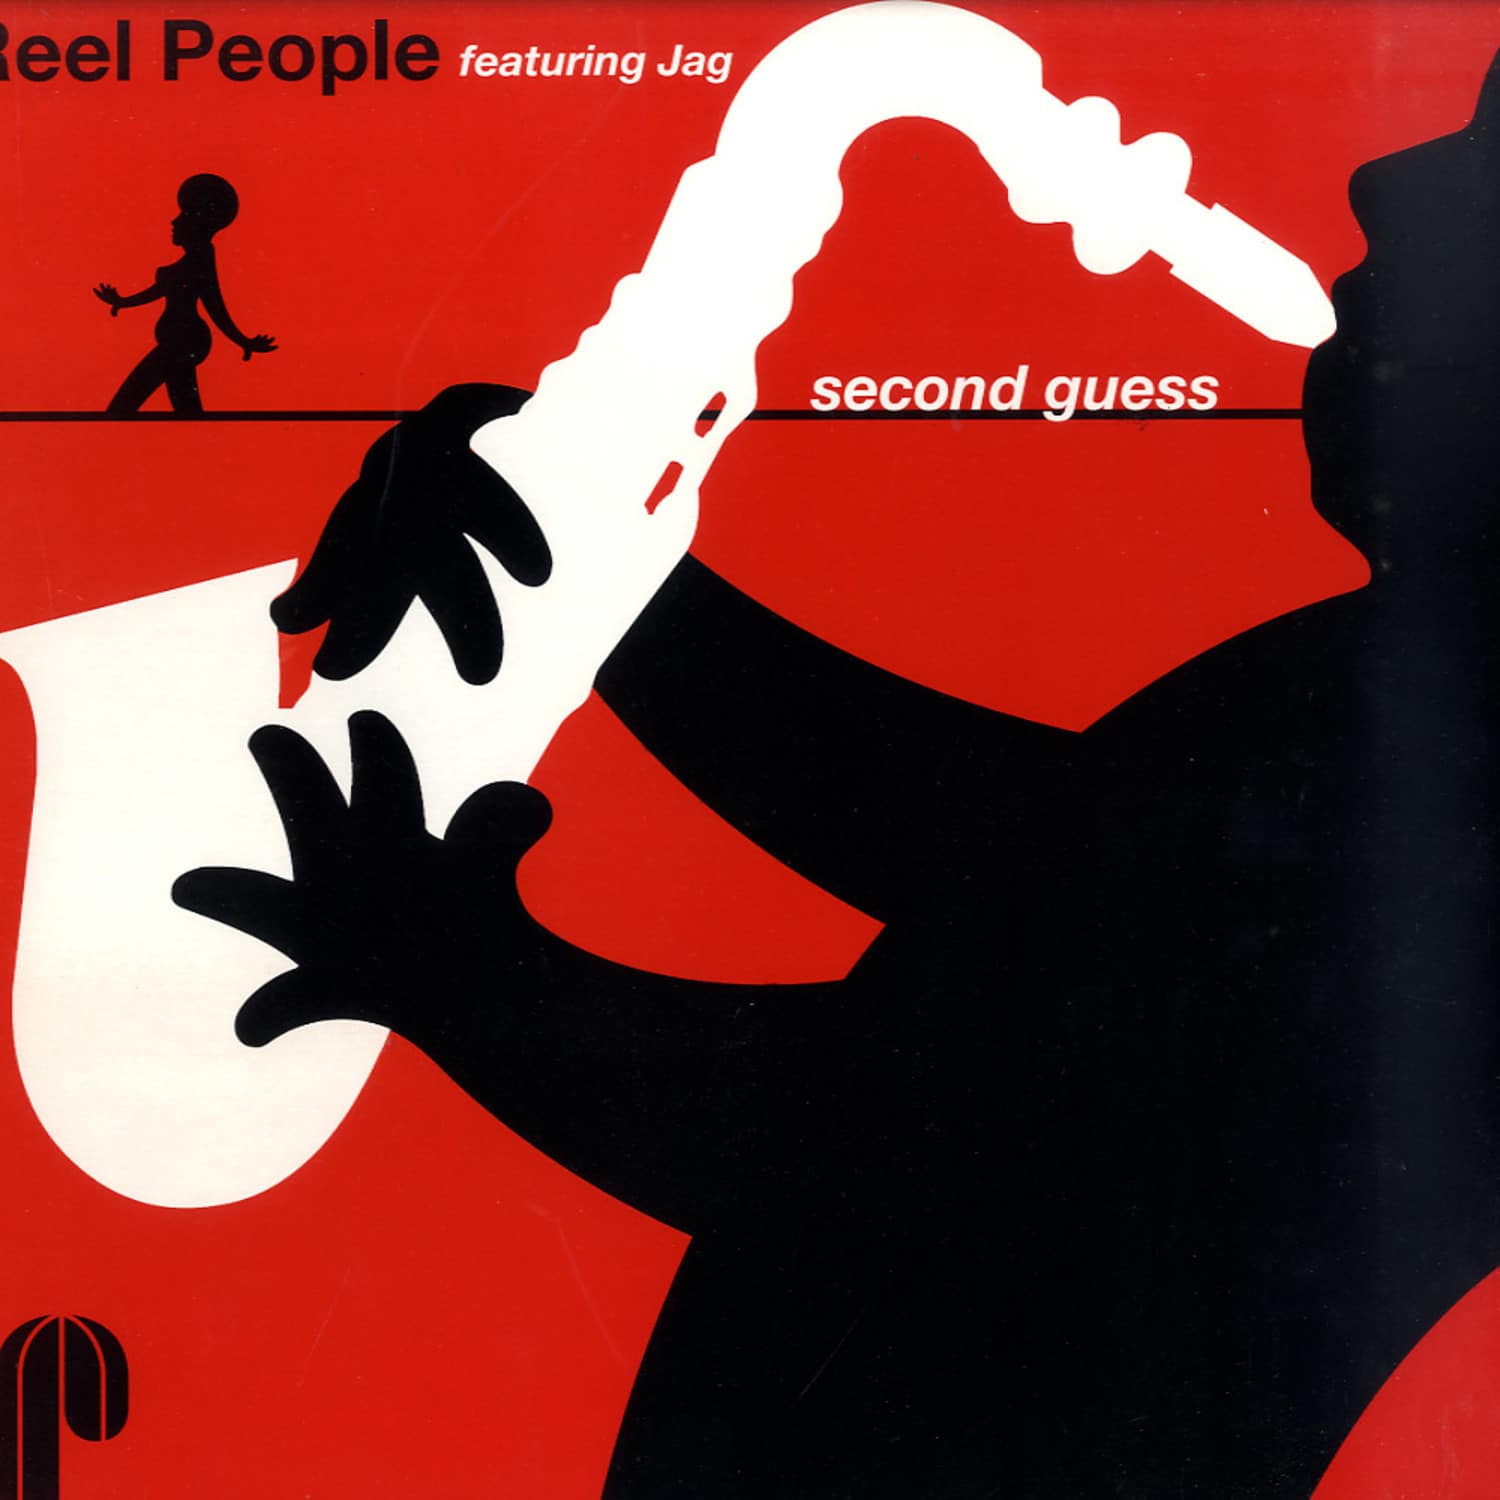 Reel People feat Jag - SECOND GUESS